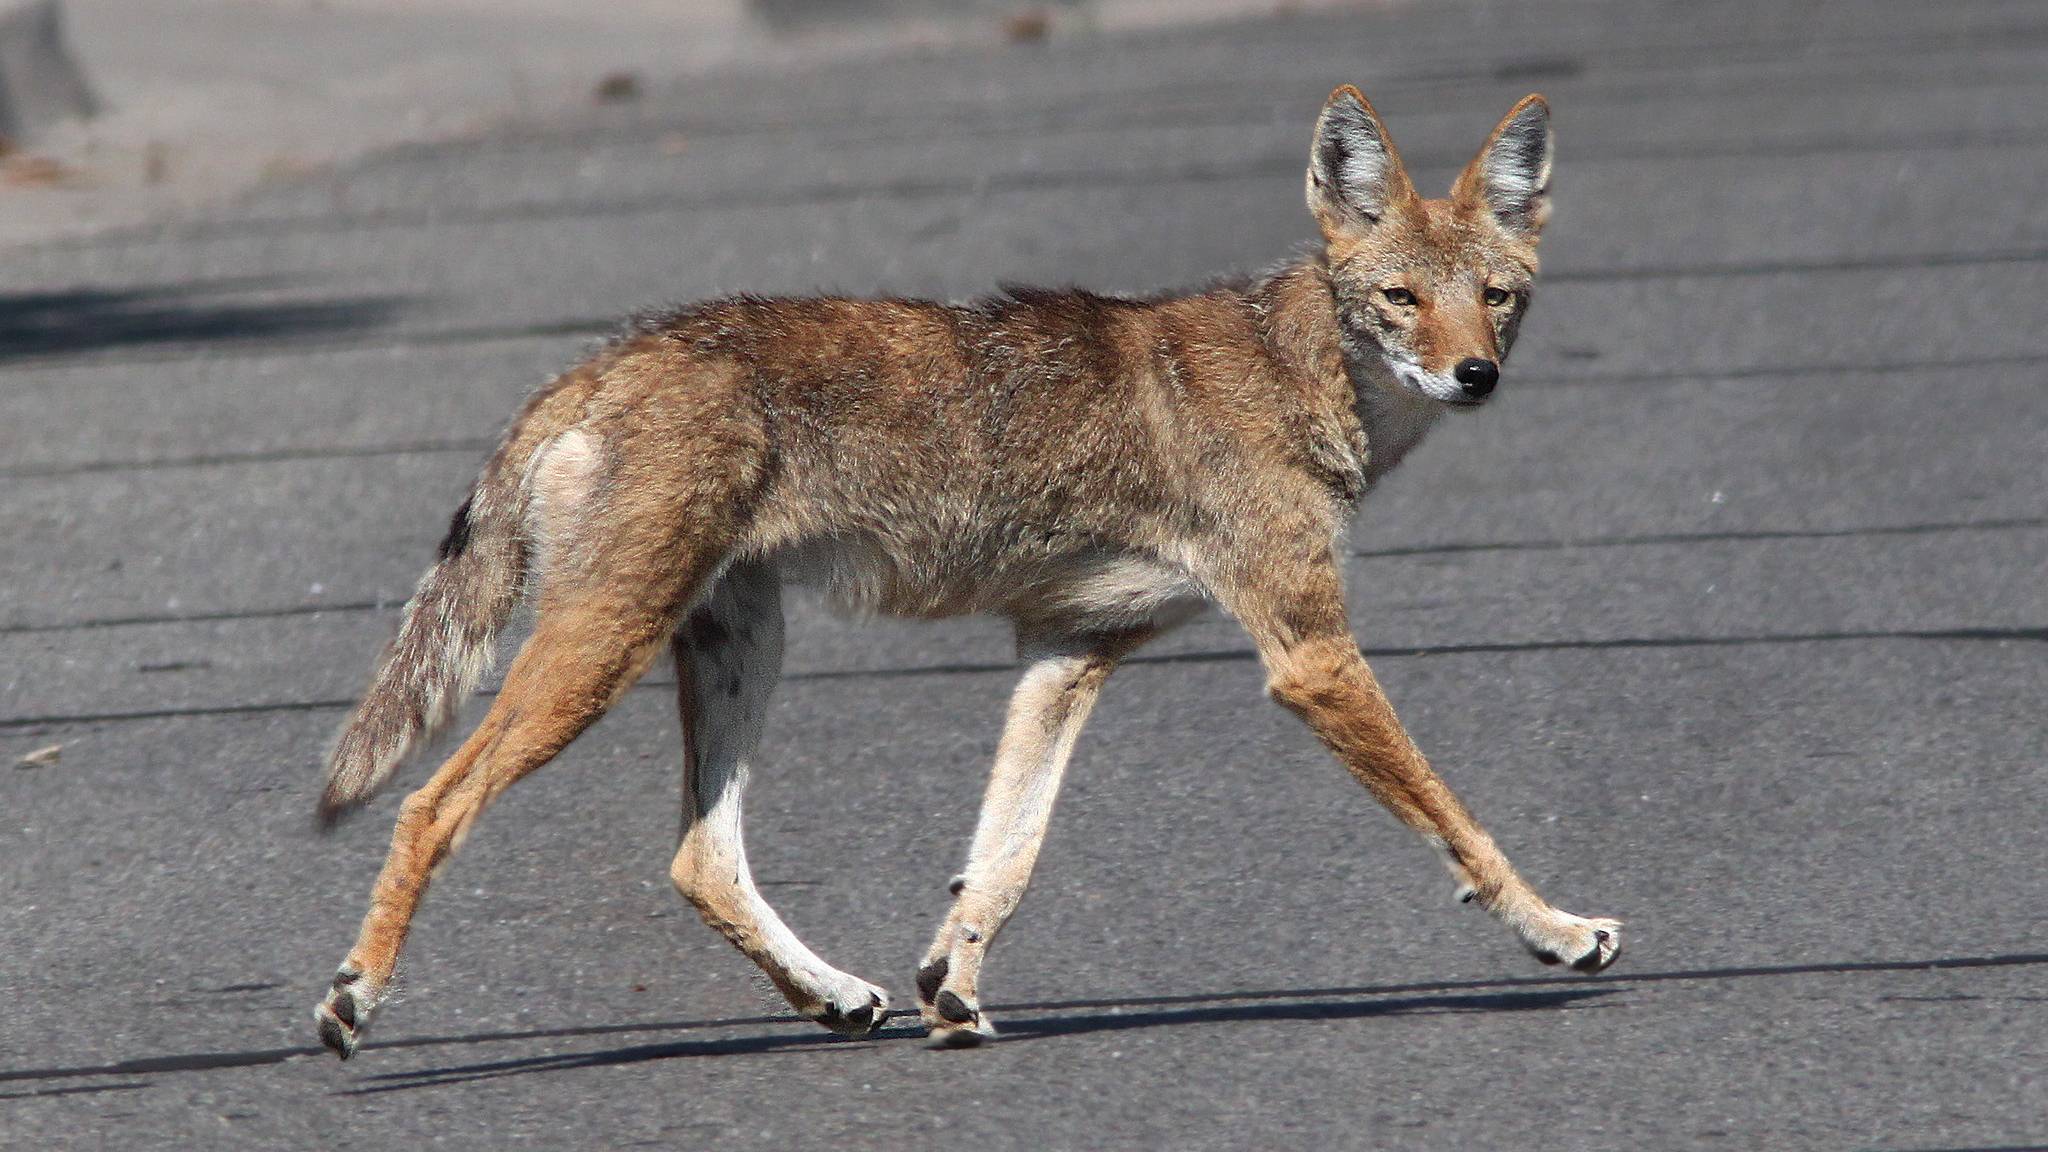 What's Up With All the Coyote Sightings? It's Mating Season. No Need To  Panic, But Leash Your Dog, Experts Say | Chicago News | WTTW